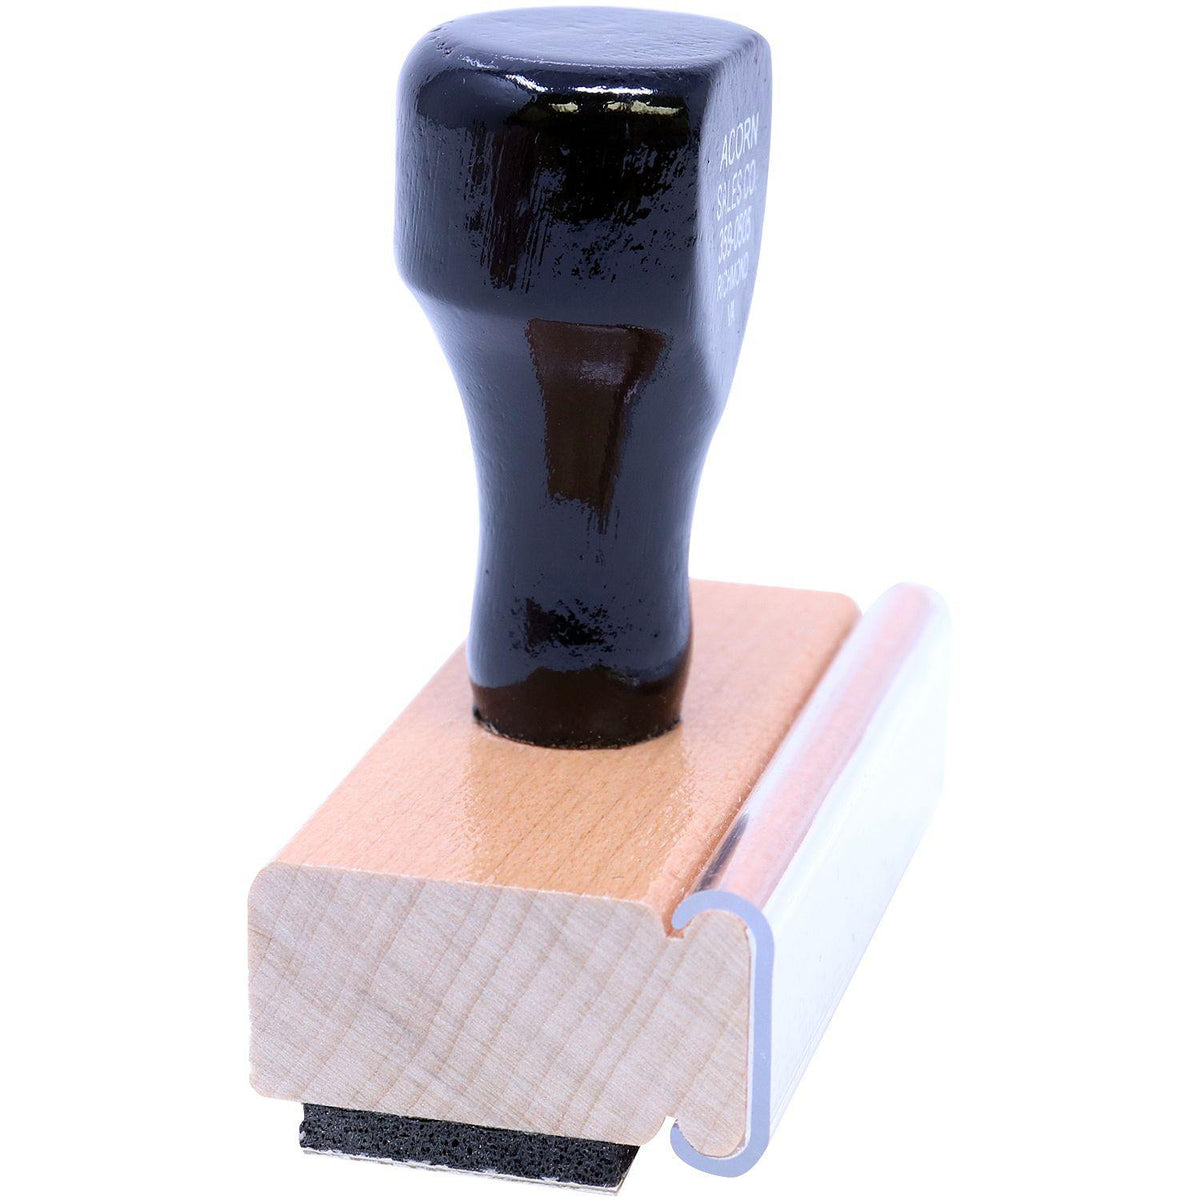 Side View of Creditors Exhibit Rubber Stamp at an Angle